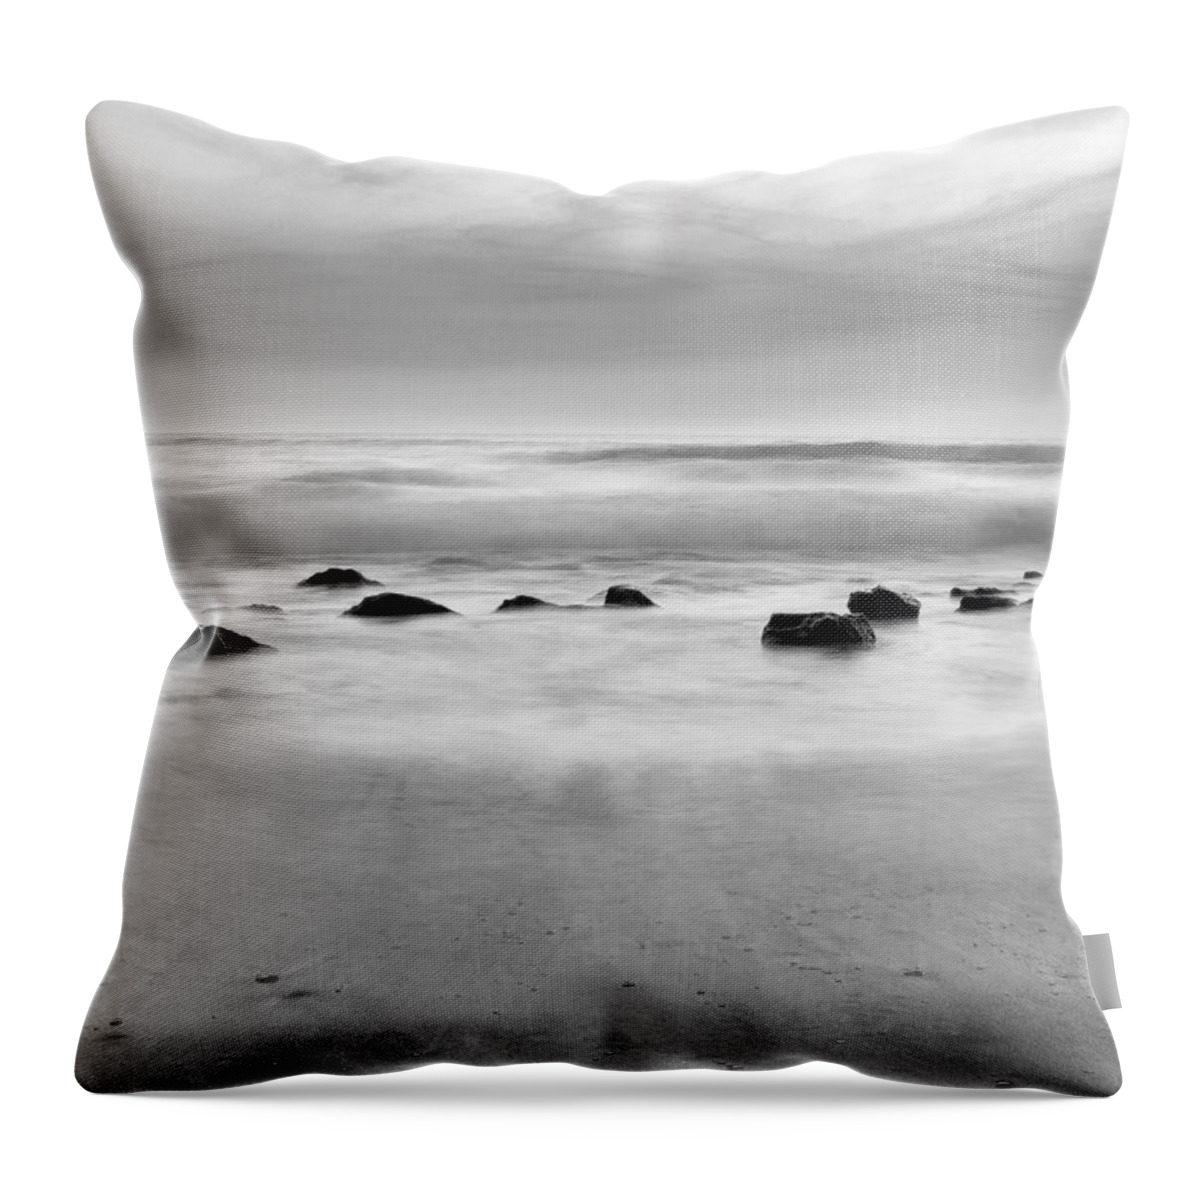 Silent Throw Pillow featuring the photograph The Sound of Silence by Meir Ezrachi